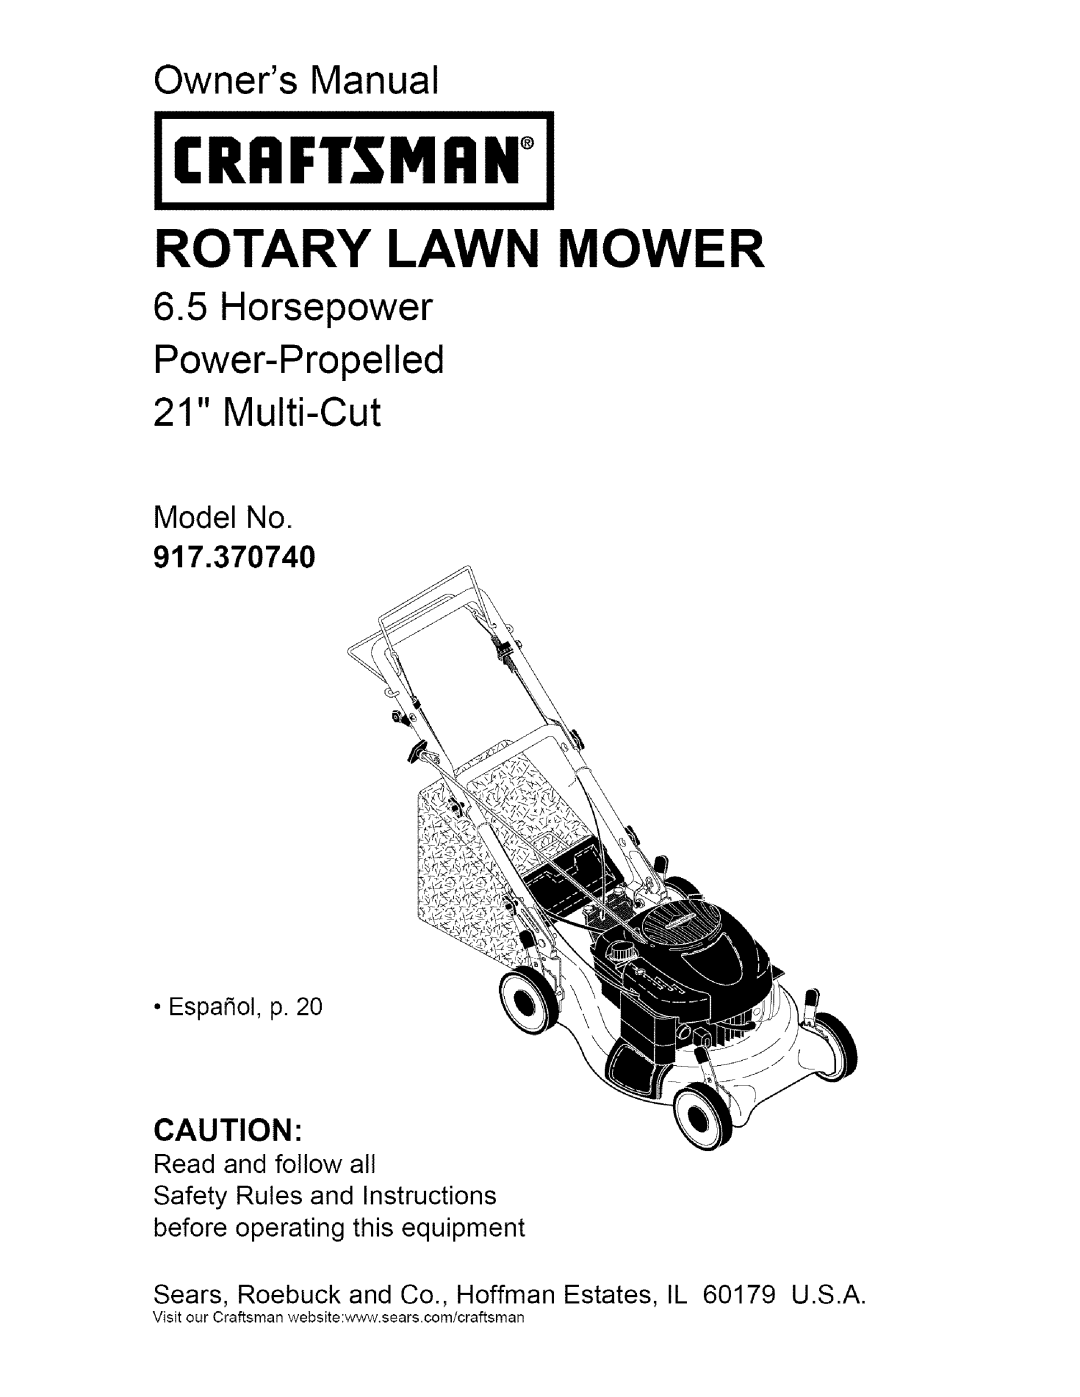 Craftsman manual Model No, 917.370740, CRnFTSMFIN, Rotary Lawn Mower, Horsepower, Owners Manual 